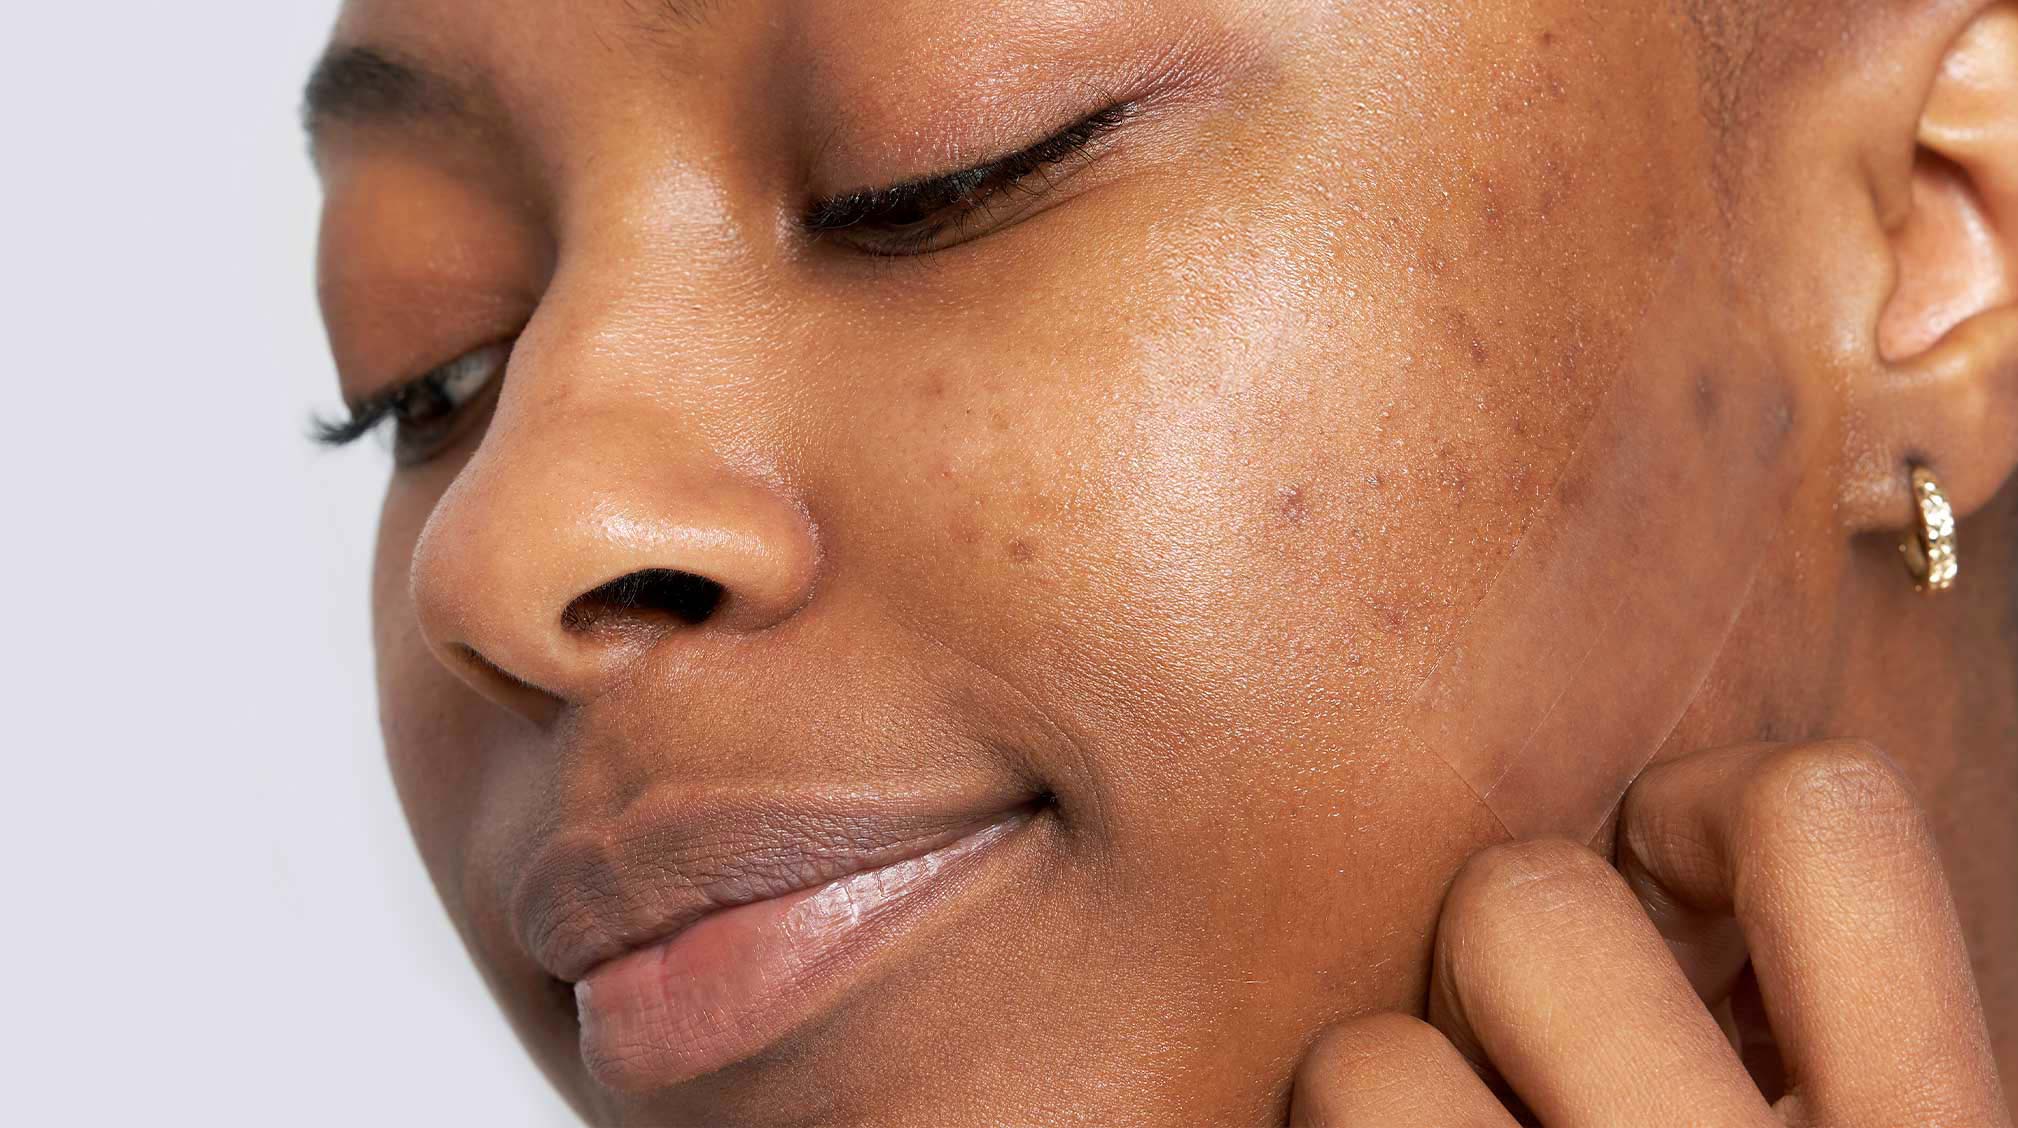 Dark skinned woman showing acne scars and hyperpigmentation on cheek